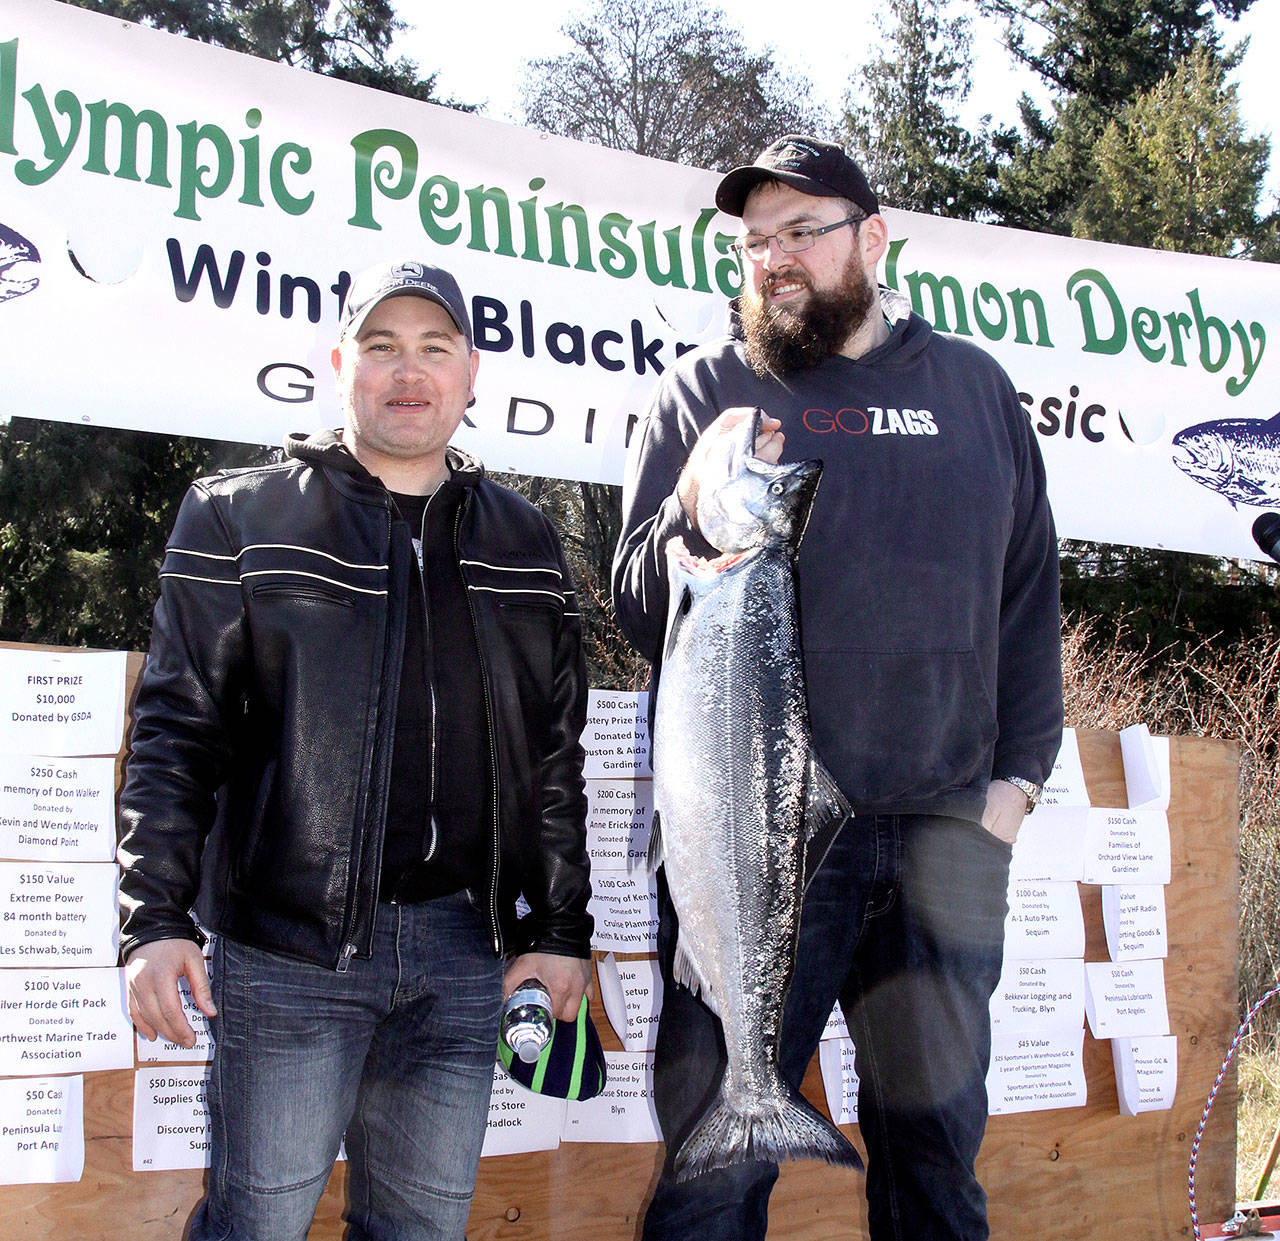 When is a tie not a tie? That is what happened with the results of the annual Olympic Peninsula Salmon Derby thatconcluded on Sunday afternoon with the awards given out at the Gardiner Boat launch. Micah Hanley of Mount Vernon,left, caught a 16.85-pound salmon at 11:23 a.m. on Saturday to lead the derby. Not to be outdone Kyle Madison of PortAngeles caught a salmon also at 16.85 pounds on at 9:35 a.m. Sunday. Since both fish were tied in weight the derbyrules state that the first of the two fish caught ise ahead in the standings. The difference is $10,000 first prize and$2,000 second prize. Hanley takes first and Madison gets second. Third place was a 16.40-pound salmon from LarryPhillips of Olympia. The three-day derby had 857 paid fisherman with a total of 233 fish caught and registered. Theaverage weight was calculated at 8.15 pounds. This was Hanley’s first derby on the Peninsula. He told his family that hewould only go fishing on Saturday, but was persuaded to come back Sunday for a prize since it looked like his fish wouldhold up in the lead, which technically, it did.